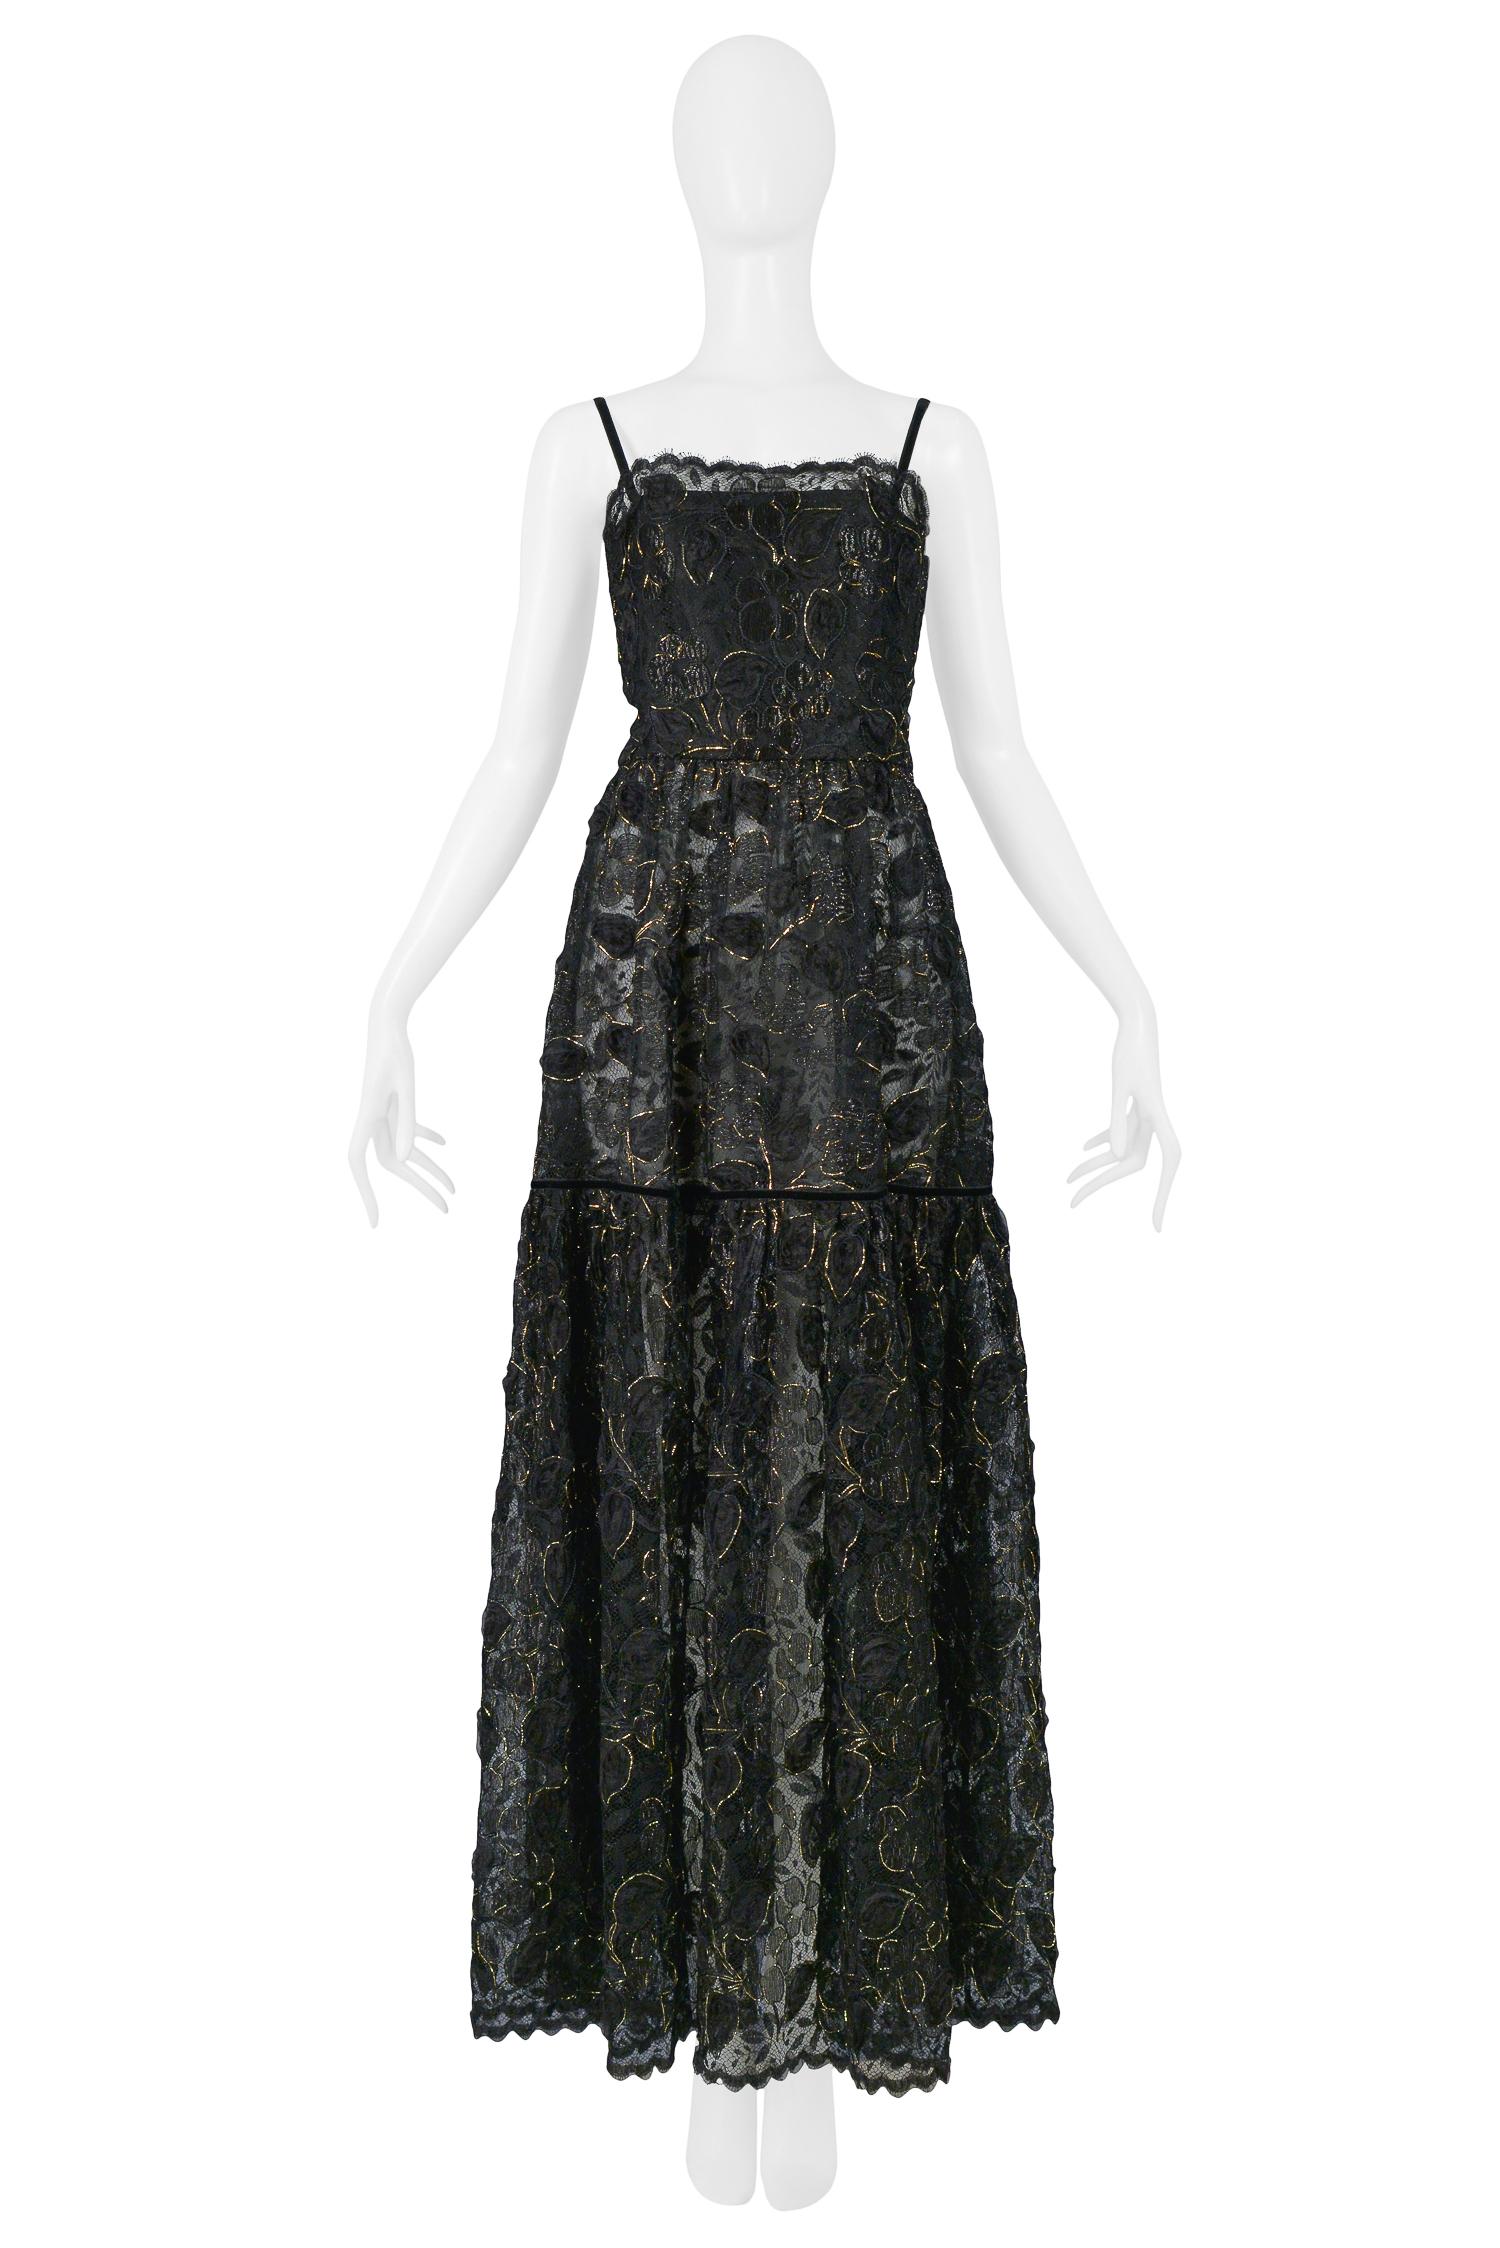 A stunning vintage Yves Saint Laurent black lace evening gown featuring gold thread throughout, a scalloped neck & hem, delicate velvet straps and ribbon at skirt. 

Excellent Condition.

Size: 38